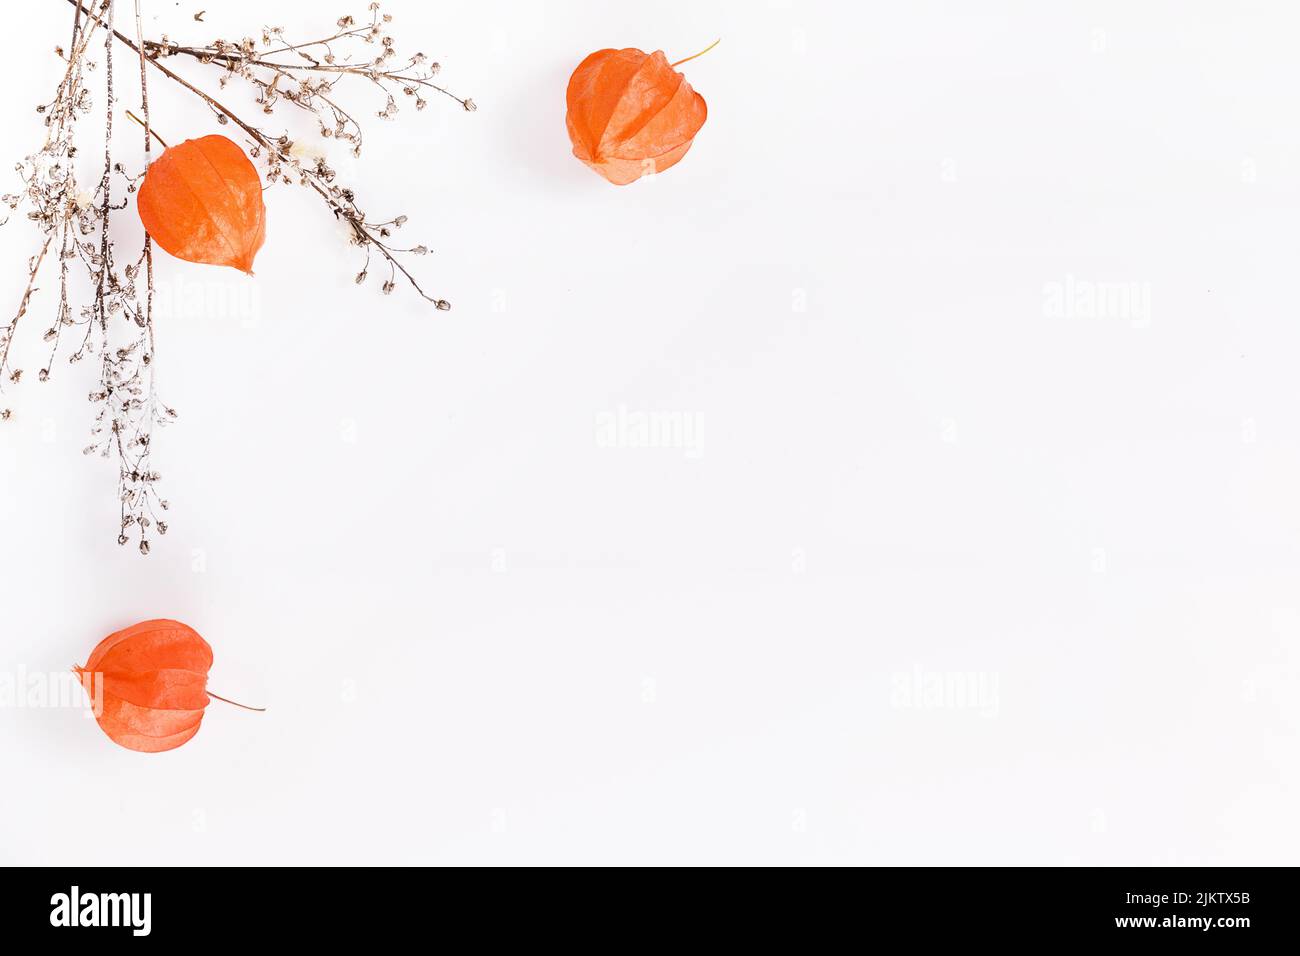 Autumn composition made of orange physalis and dry autumn twigs on white background. Autumn, fall concept Stock Photo